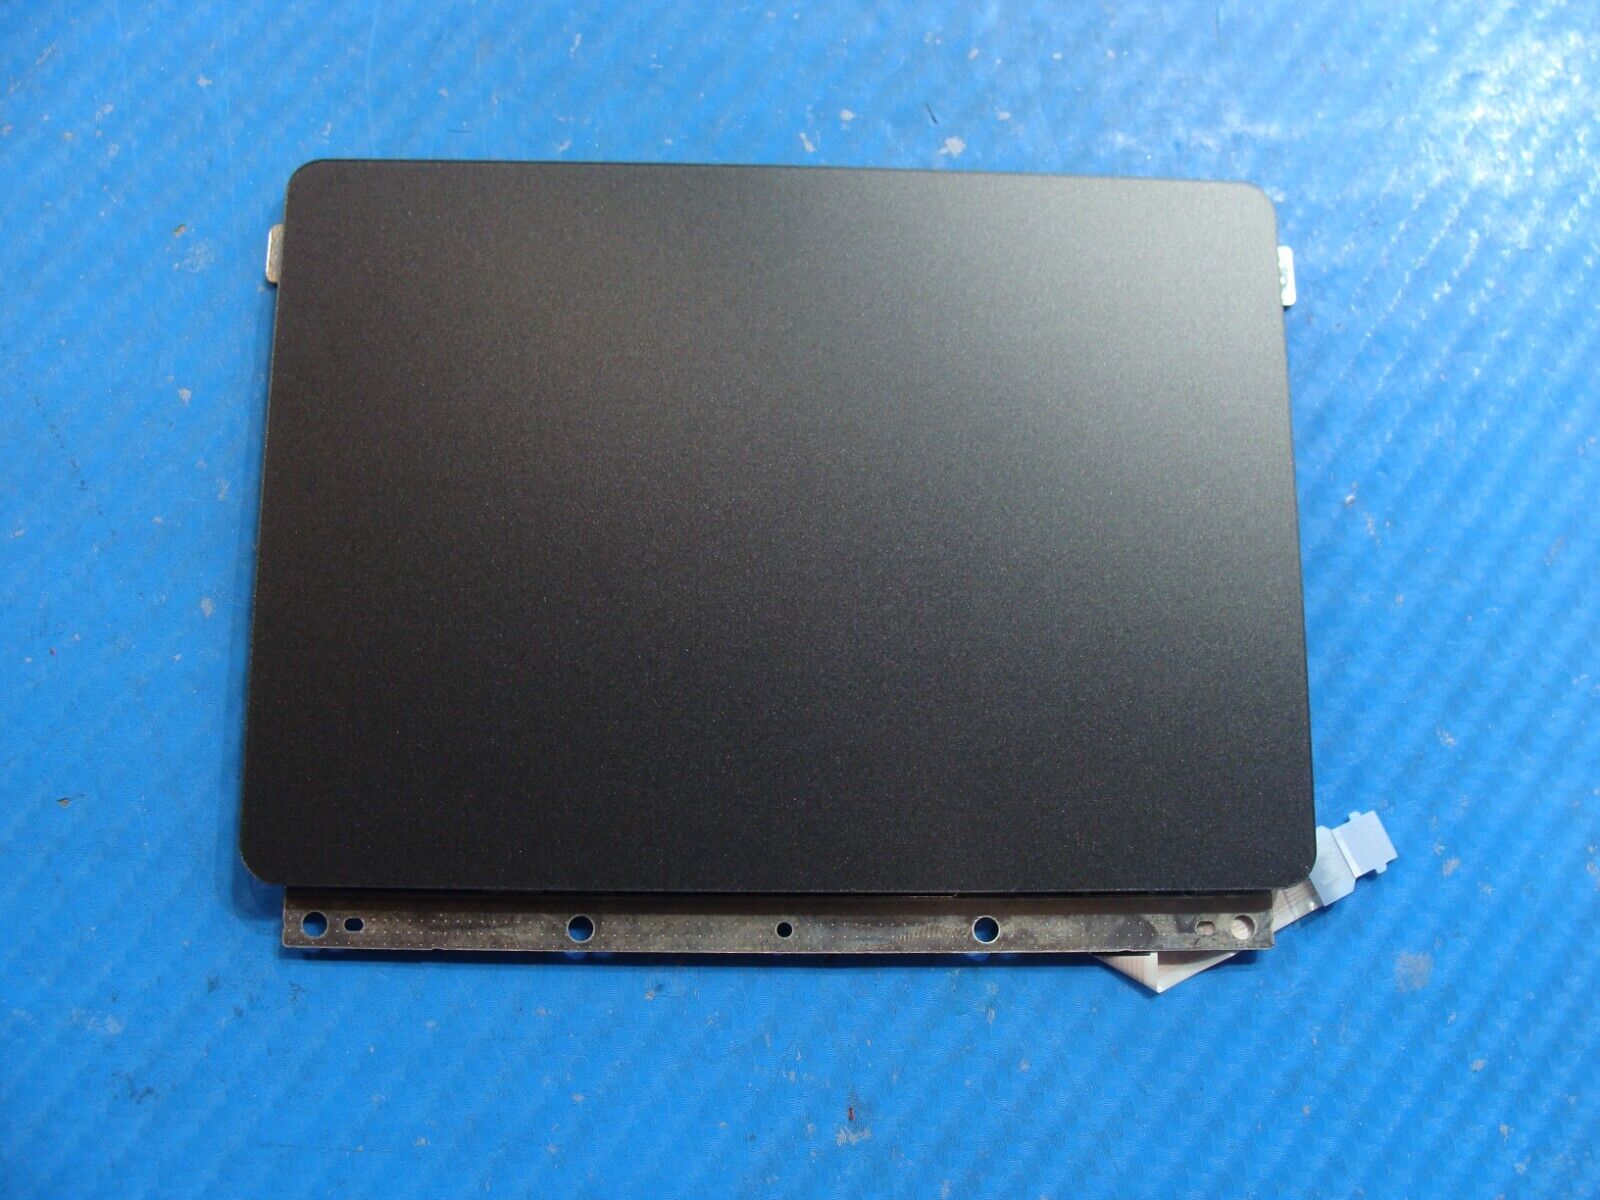 Samsung NoteBook 7 Spin 15.6” NP750QUB-K01US TouchPad w/Cable Black BA92-18355B